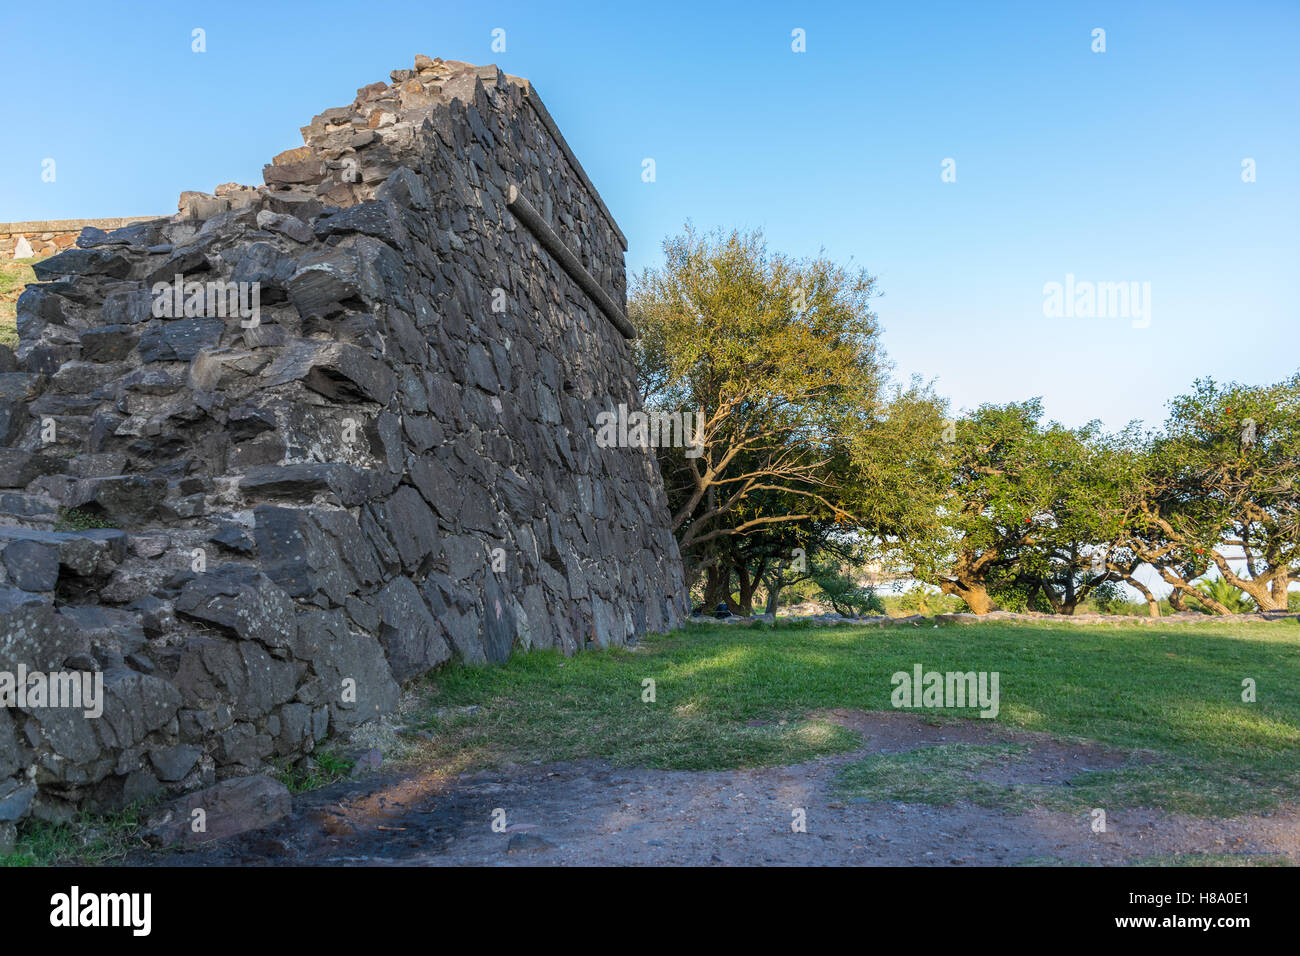 Breach in the city walls, around the antique neighborhood of Colonia del Sacramento, leading to a natural overlook terrace Stock Photo